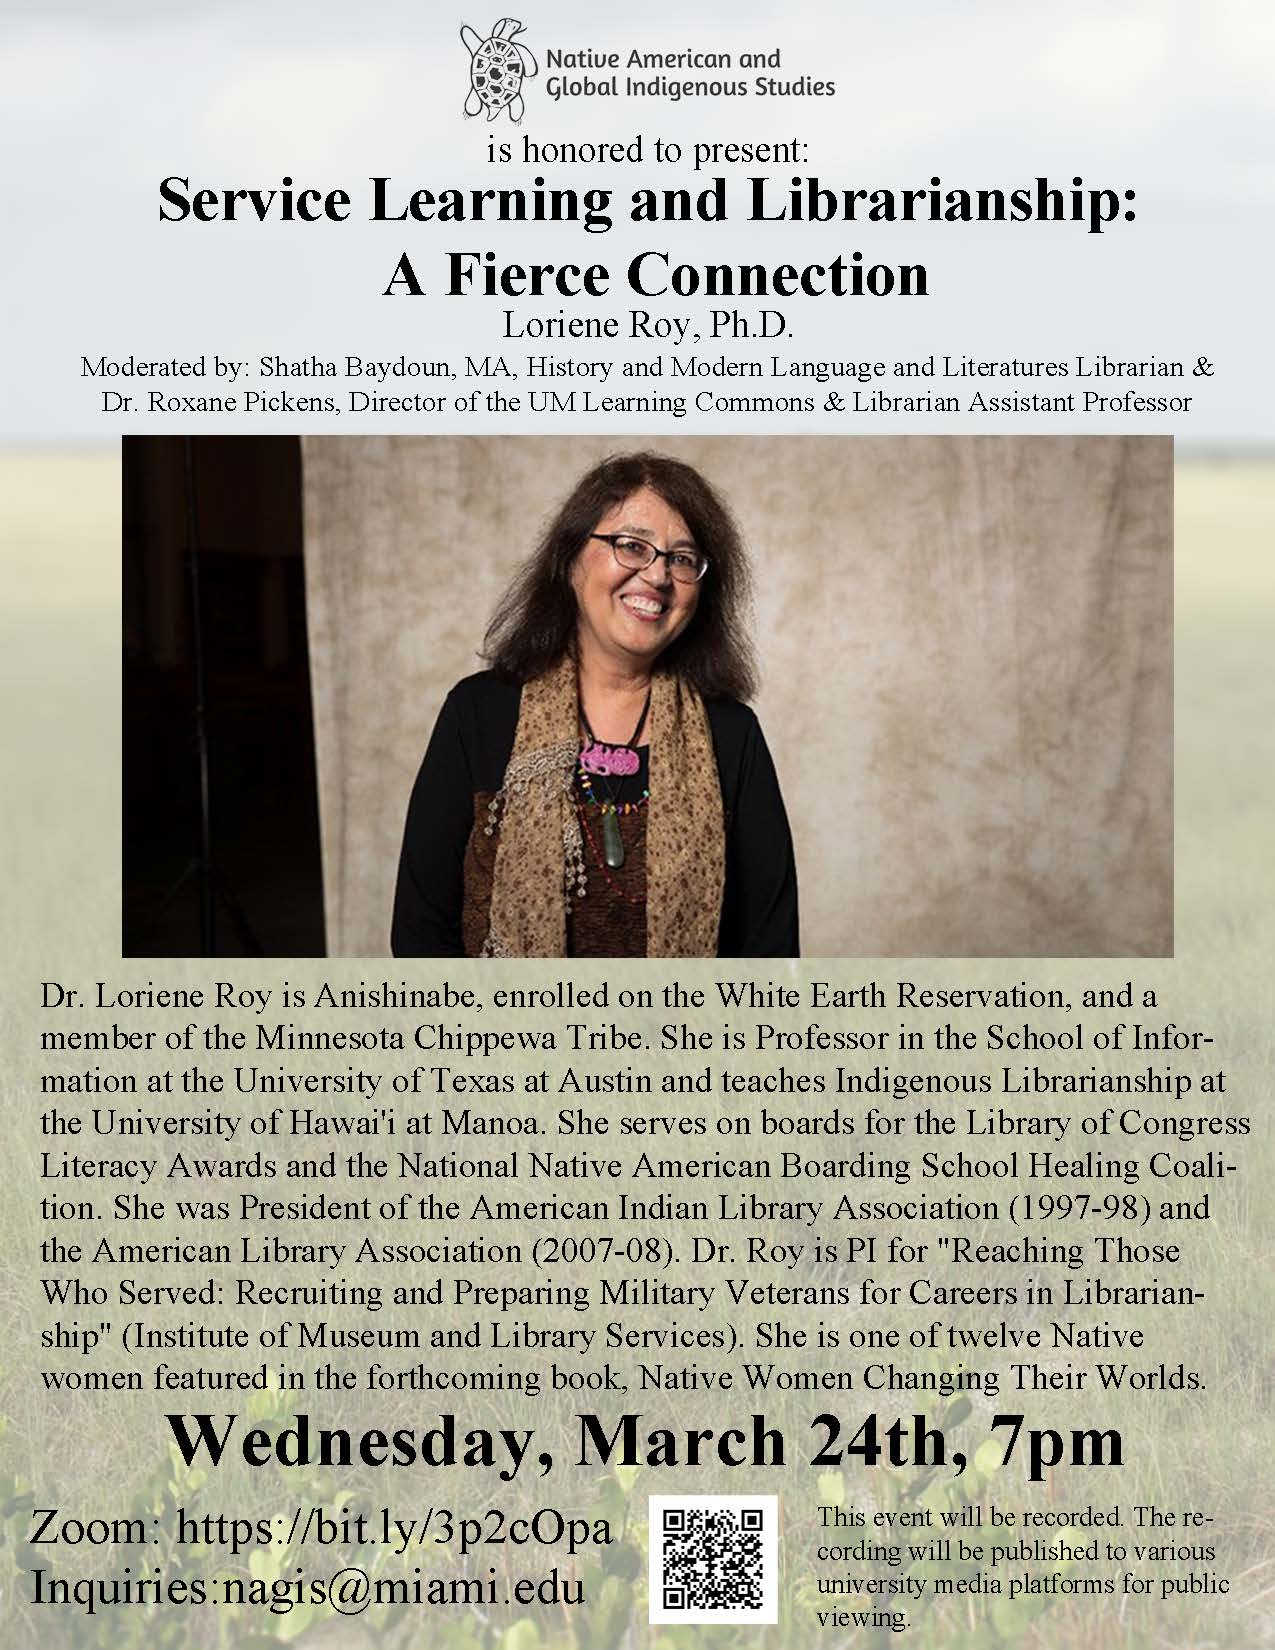 This is the flyer for the lecture with Loriene Roy on March 24, 2021.